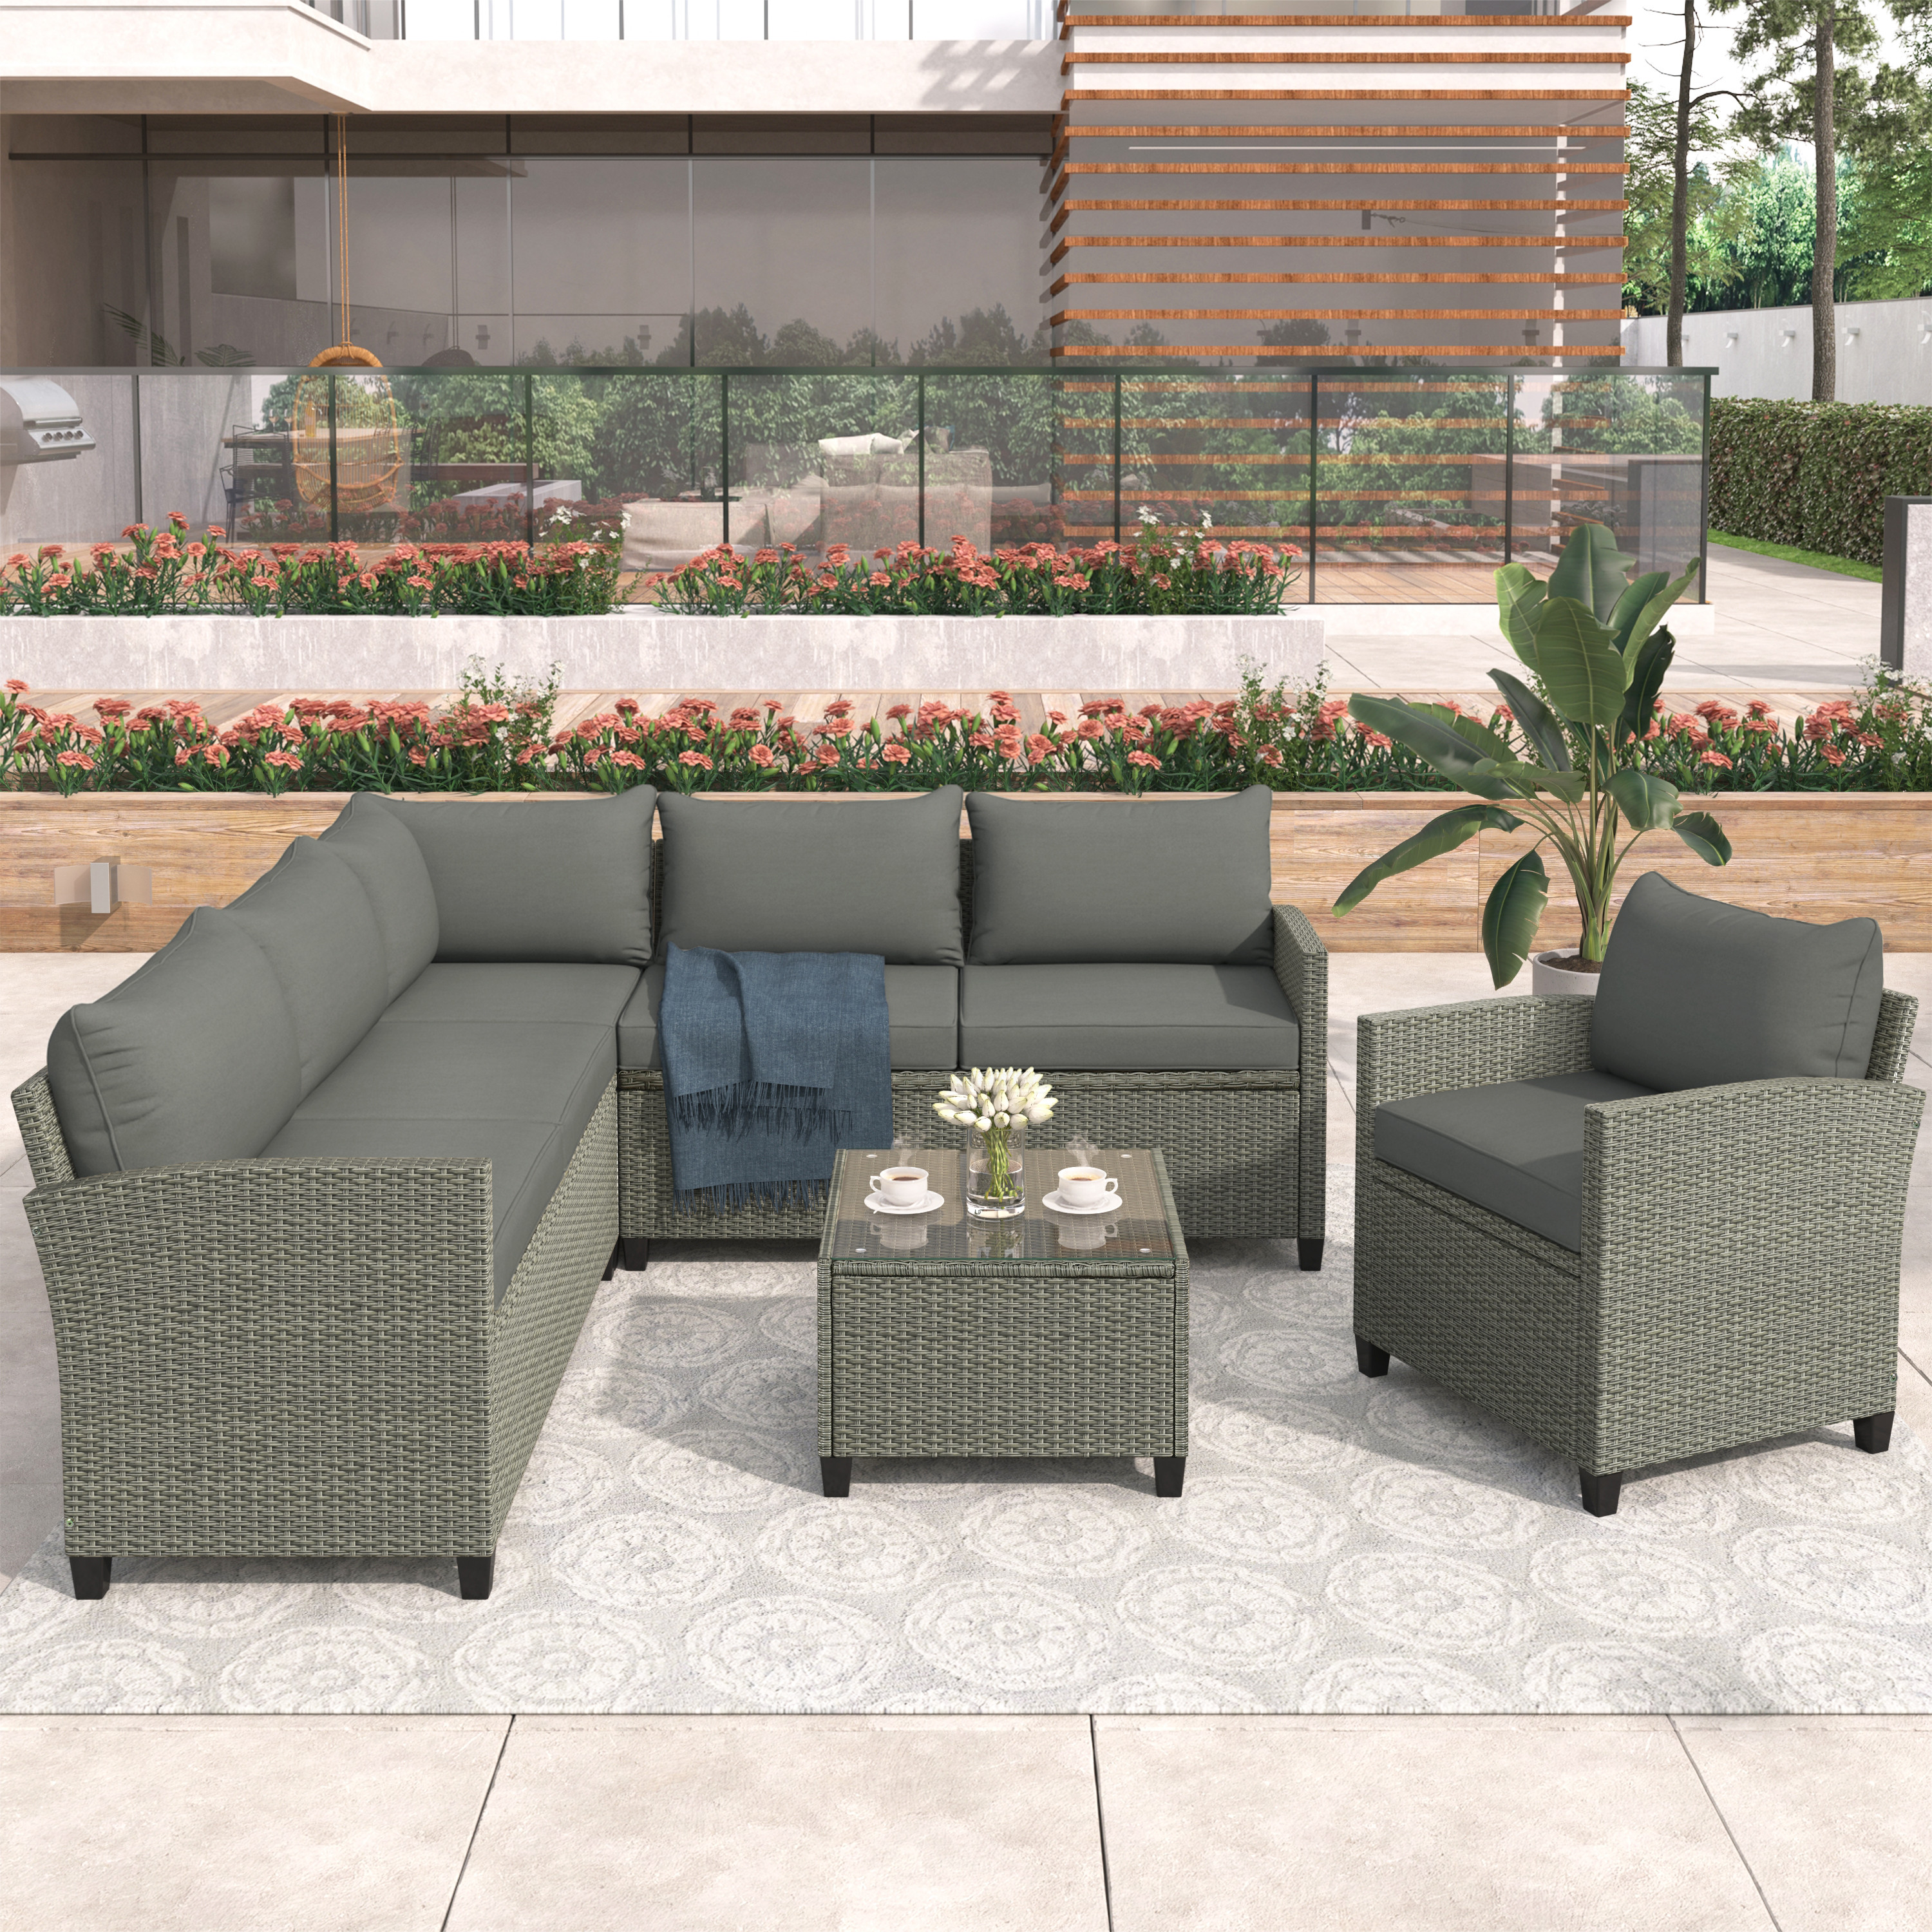 Garden Patio Conversation Set, BTMWAY 5 Piece Outdoor Sectional Sofa Couch Patio Furniture Sets with Glass Table, Cushions and Single Chair, PE Wicker Patio Sofa Sets for Garden Backyard Poolside Lawn - image 3 of 9